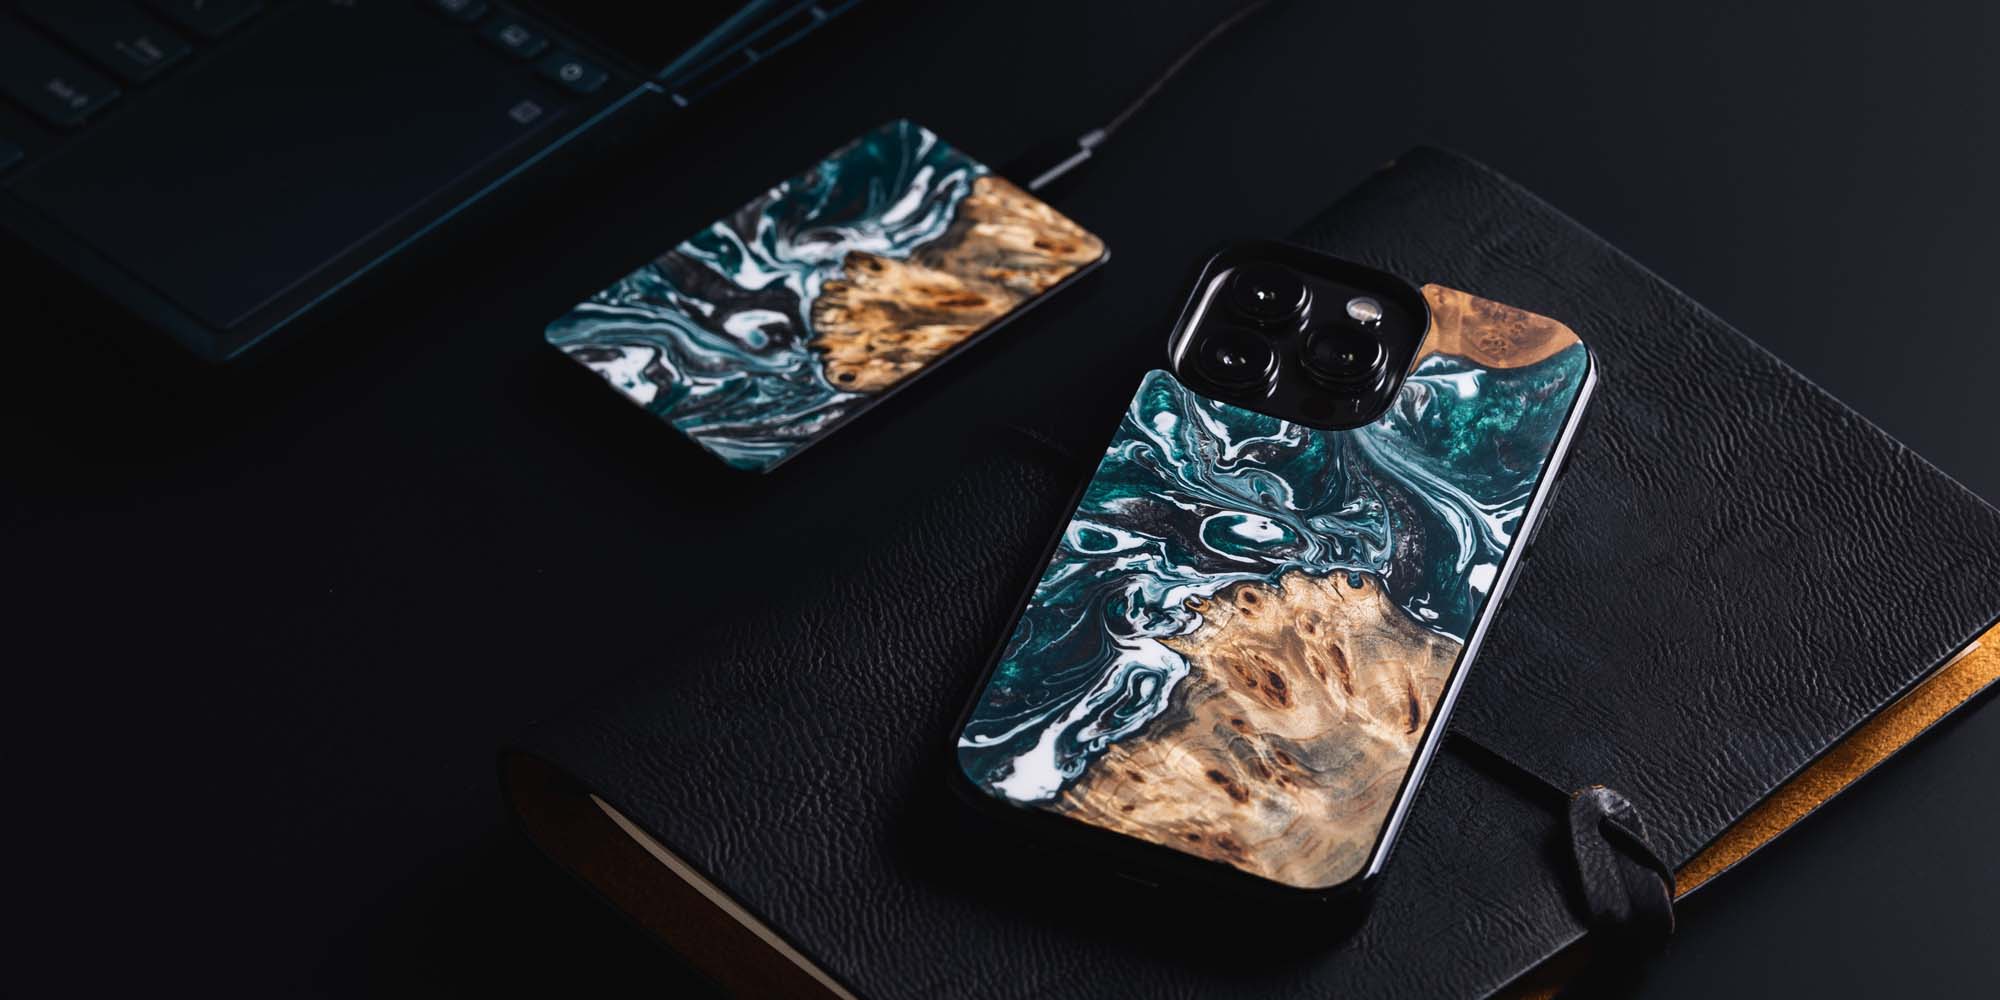 Gorgeous phone case and wireless charger made of resin and wood.